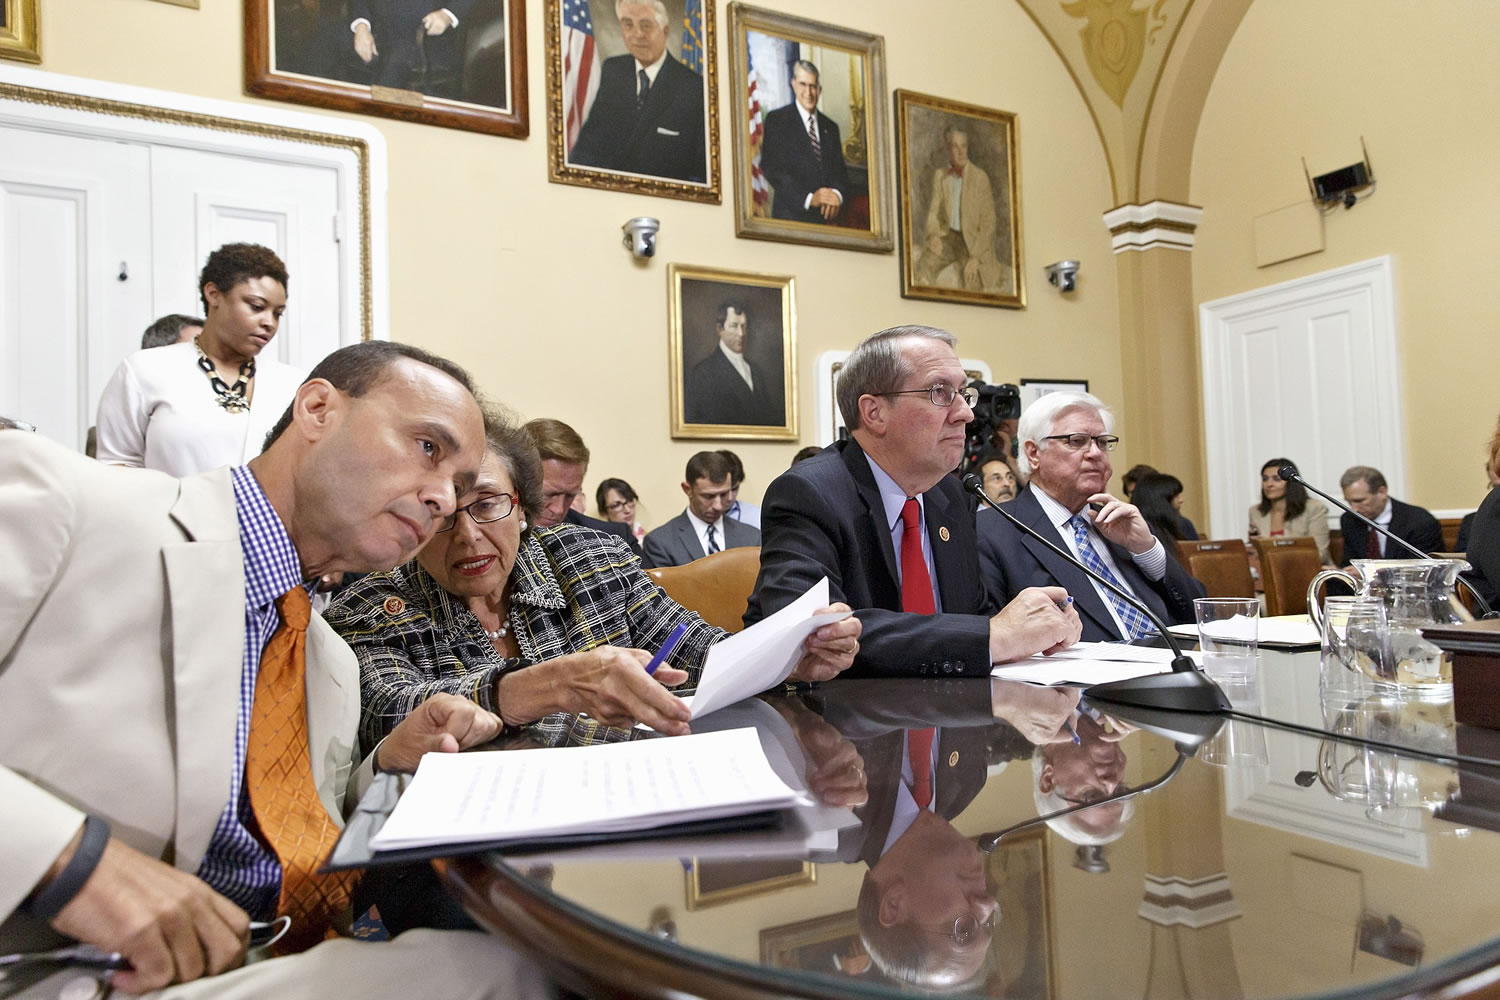 Rep. Luis V. Gutierrez, D-Ill., from left, confers with Rep. Nita Lowey, D-N.Y., , as the House Rules Committee meets Friday in Washington to deal with the influx of migrant children at the U.S.-Mexico border. They are joined by House Judiciary Committee Chairman Rep. Bob Goodlatte, R-Va., and Rep.